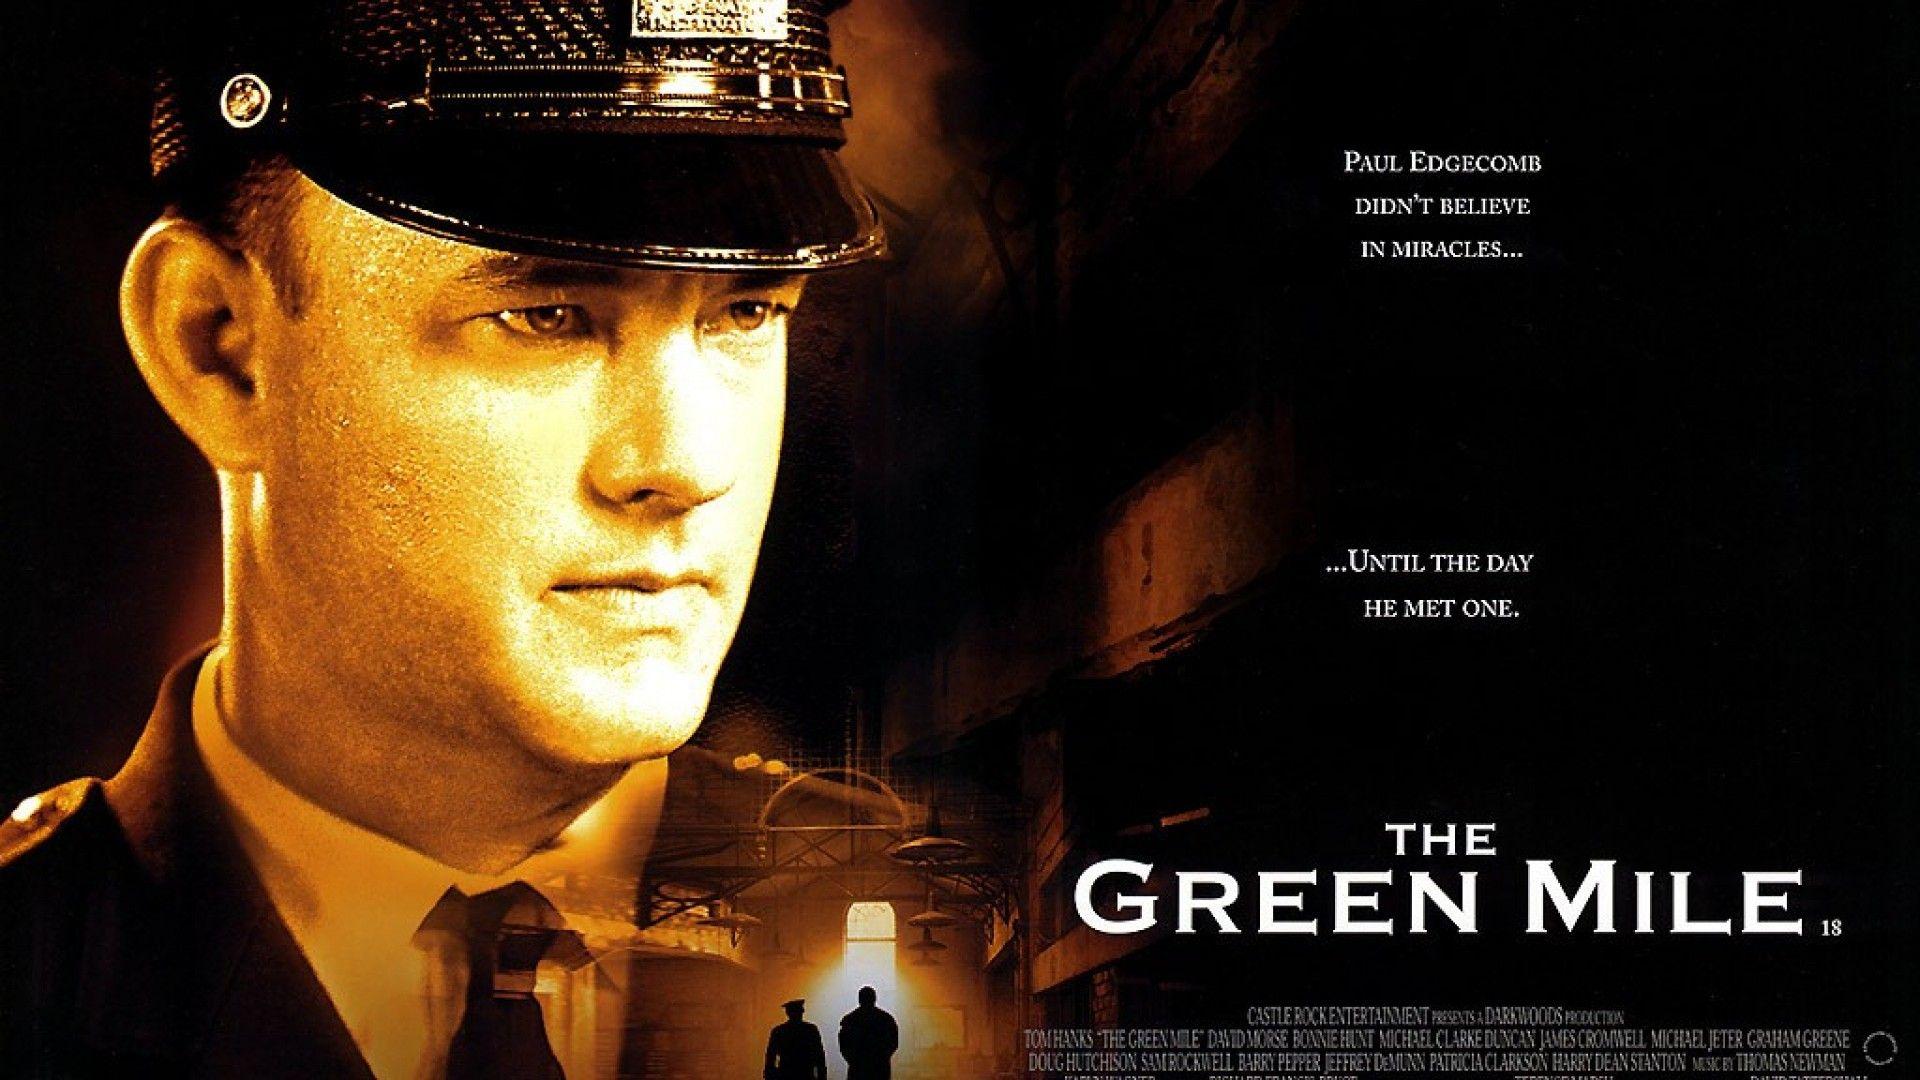 THE GREEN MILE drama poster f wallpaperx1080